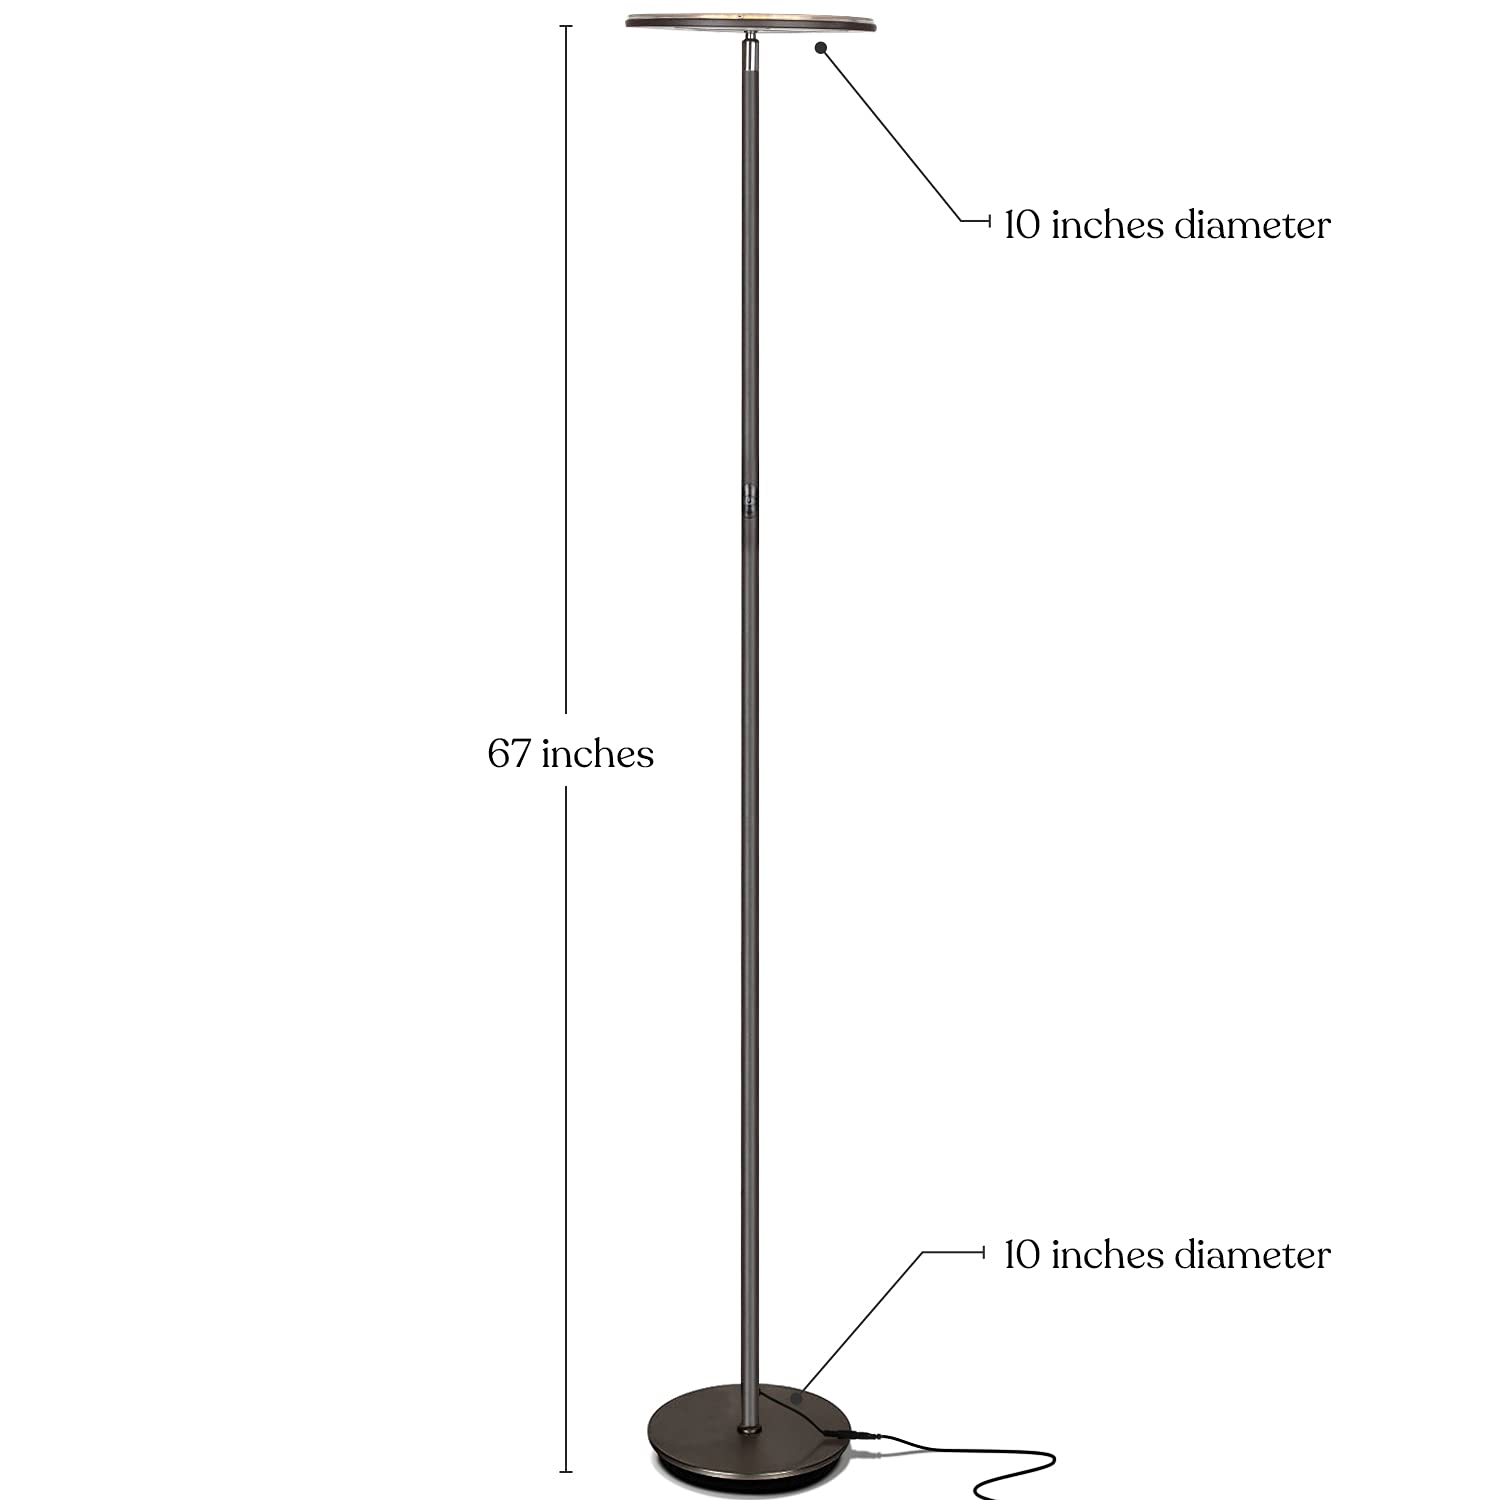 Brightech Sky Flux Dimmable LED Floor Lamp – Super Bright Floor Lamp for Living Room and Offices – Torchiere Standing Lamp with 3 Light Options, Tall Lamp for Bedroom Reading and More - Bronze